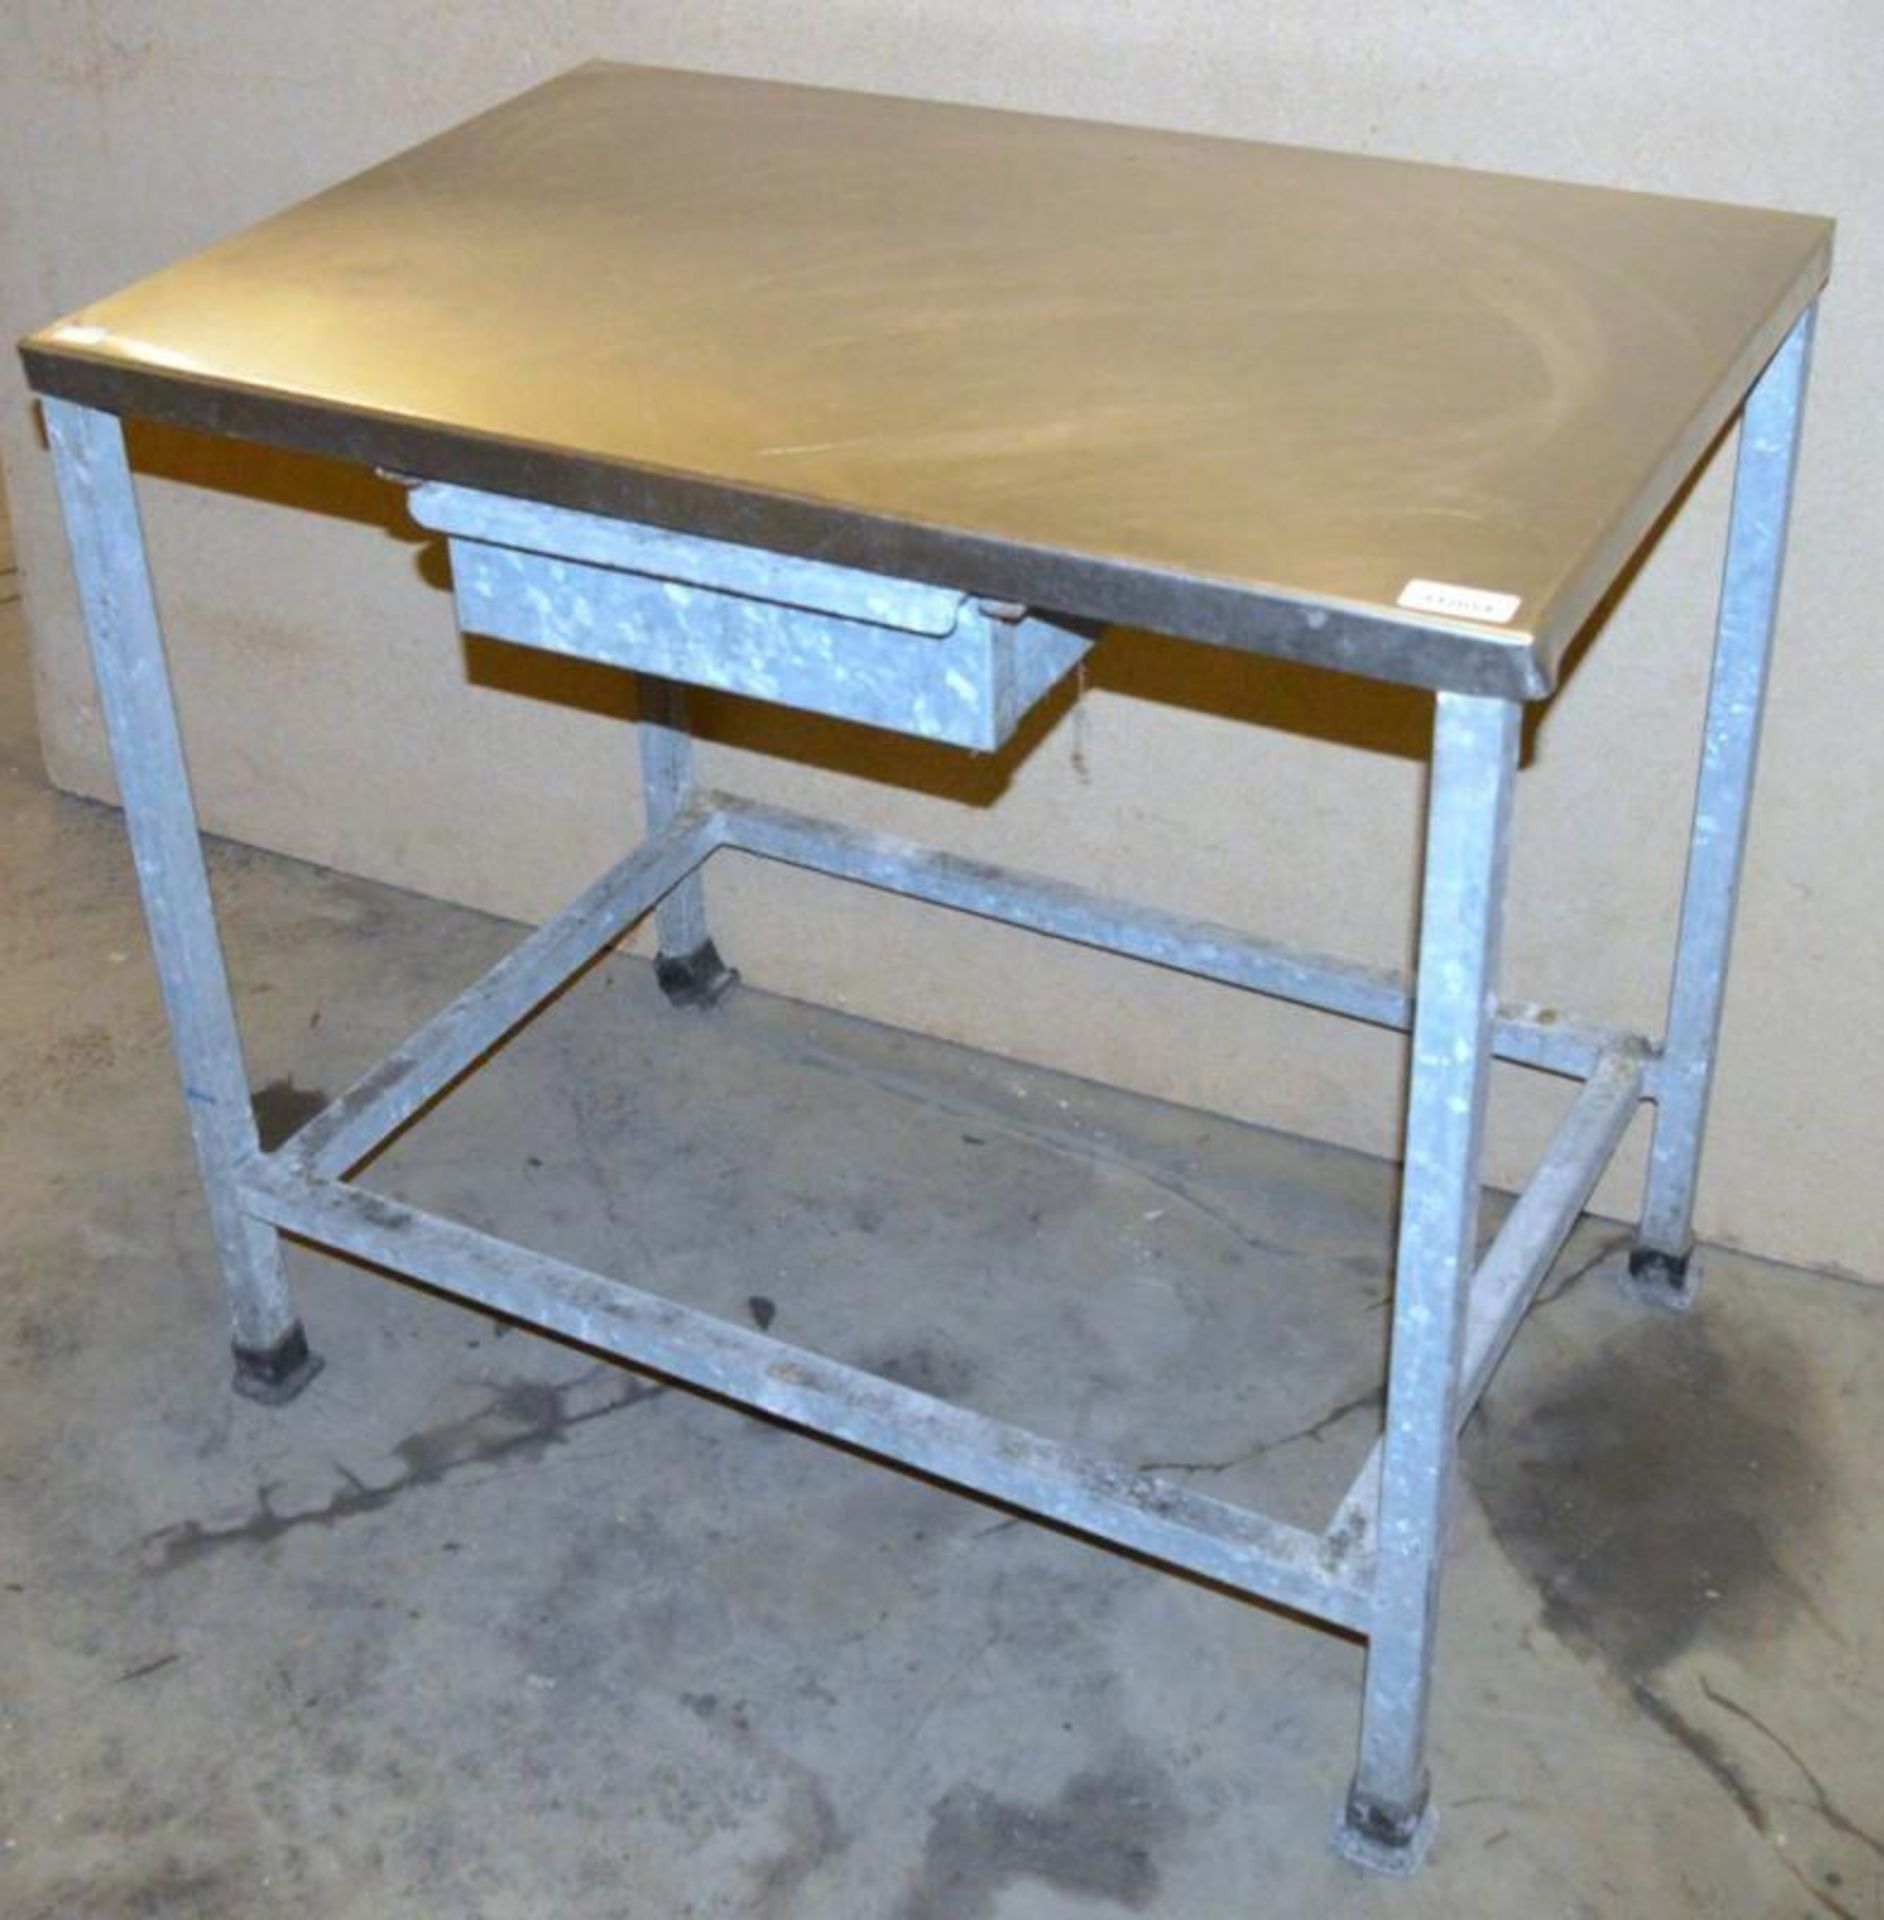 1 x Preperation Table With Stainless Steel Surface and Integral Drawer - H84 x W91 x D60 cms - CL282